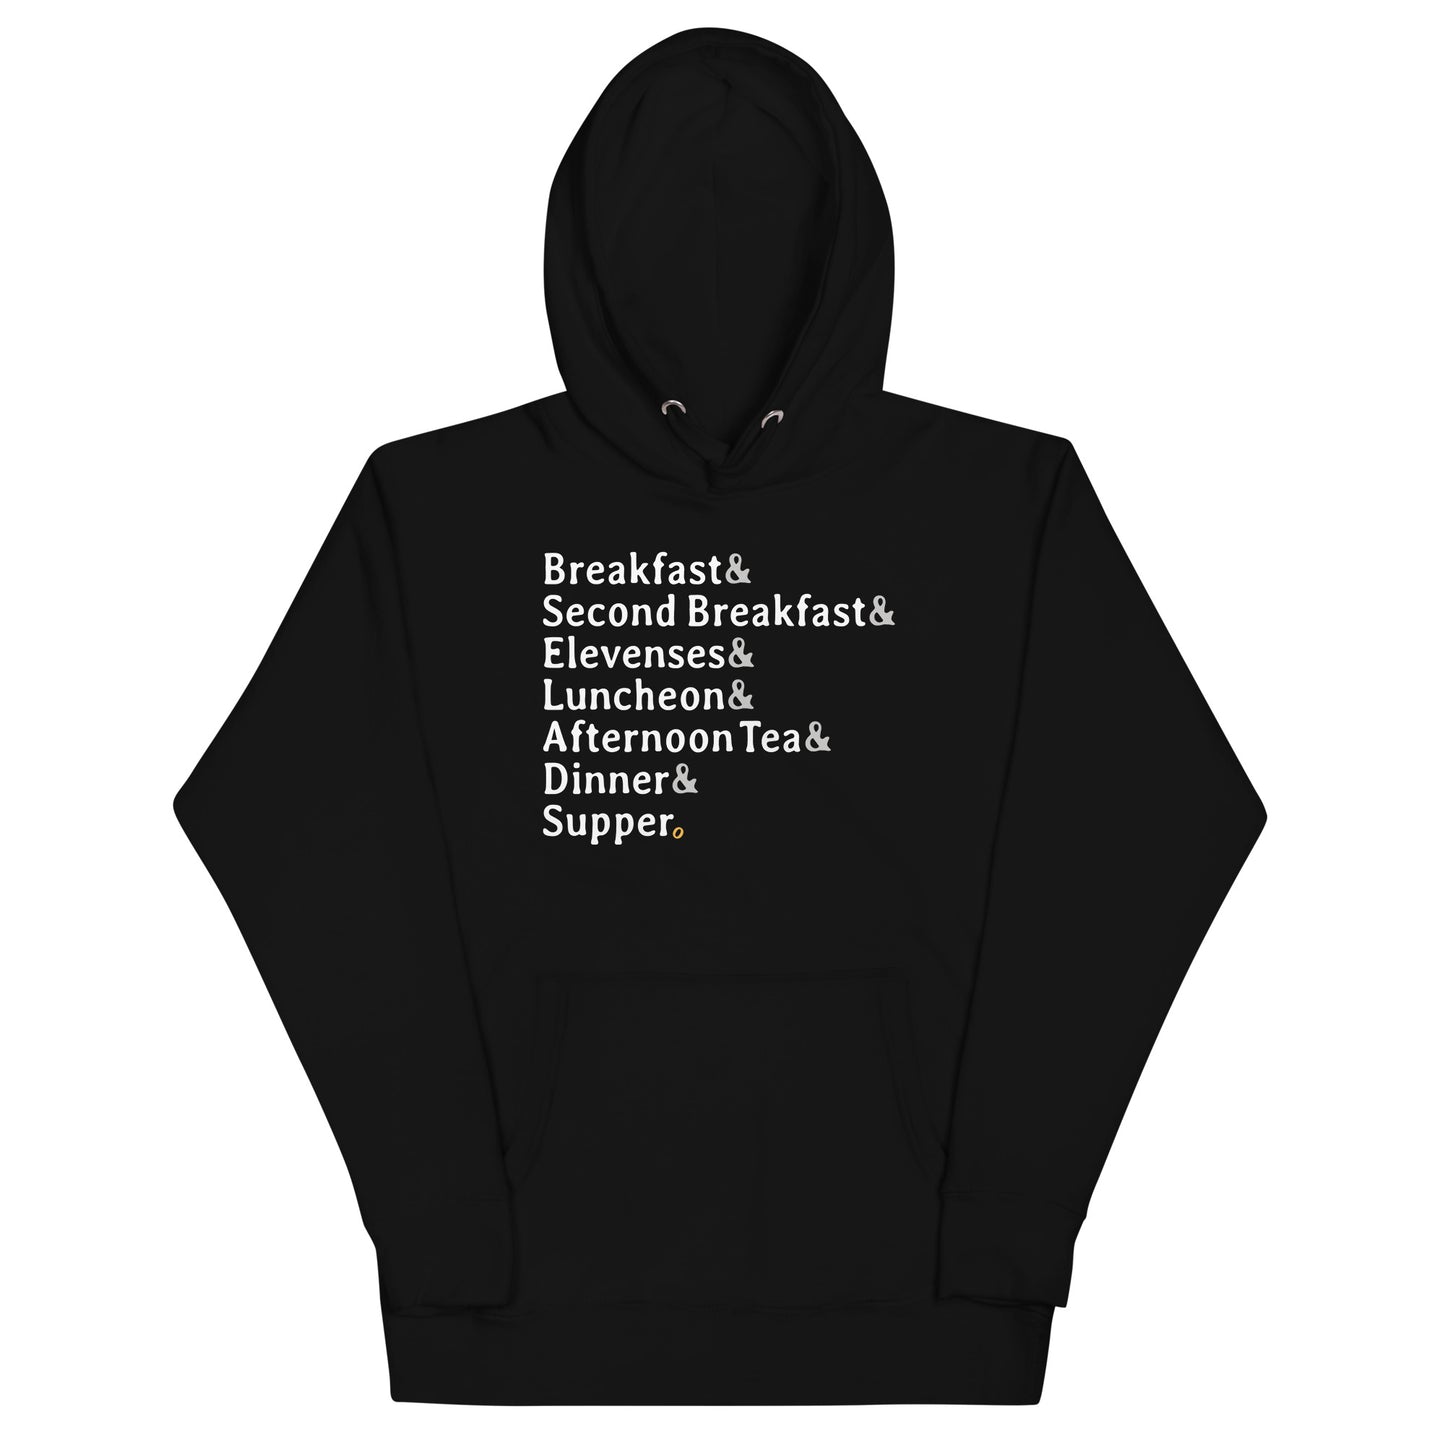 Typical Daily Meals Unisex Hoodie